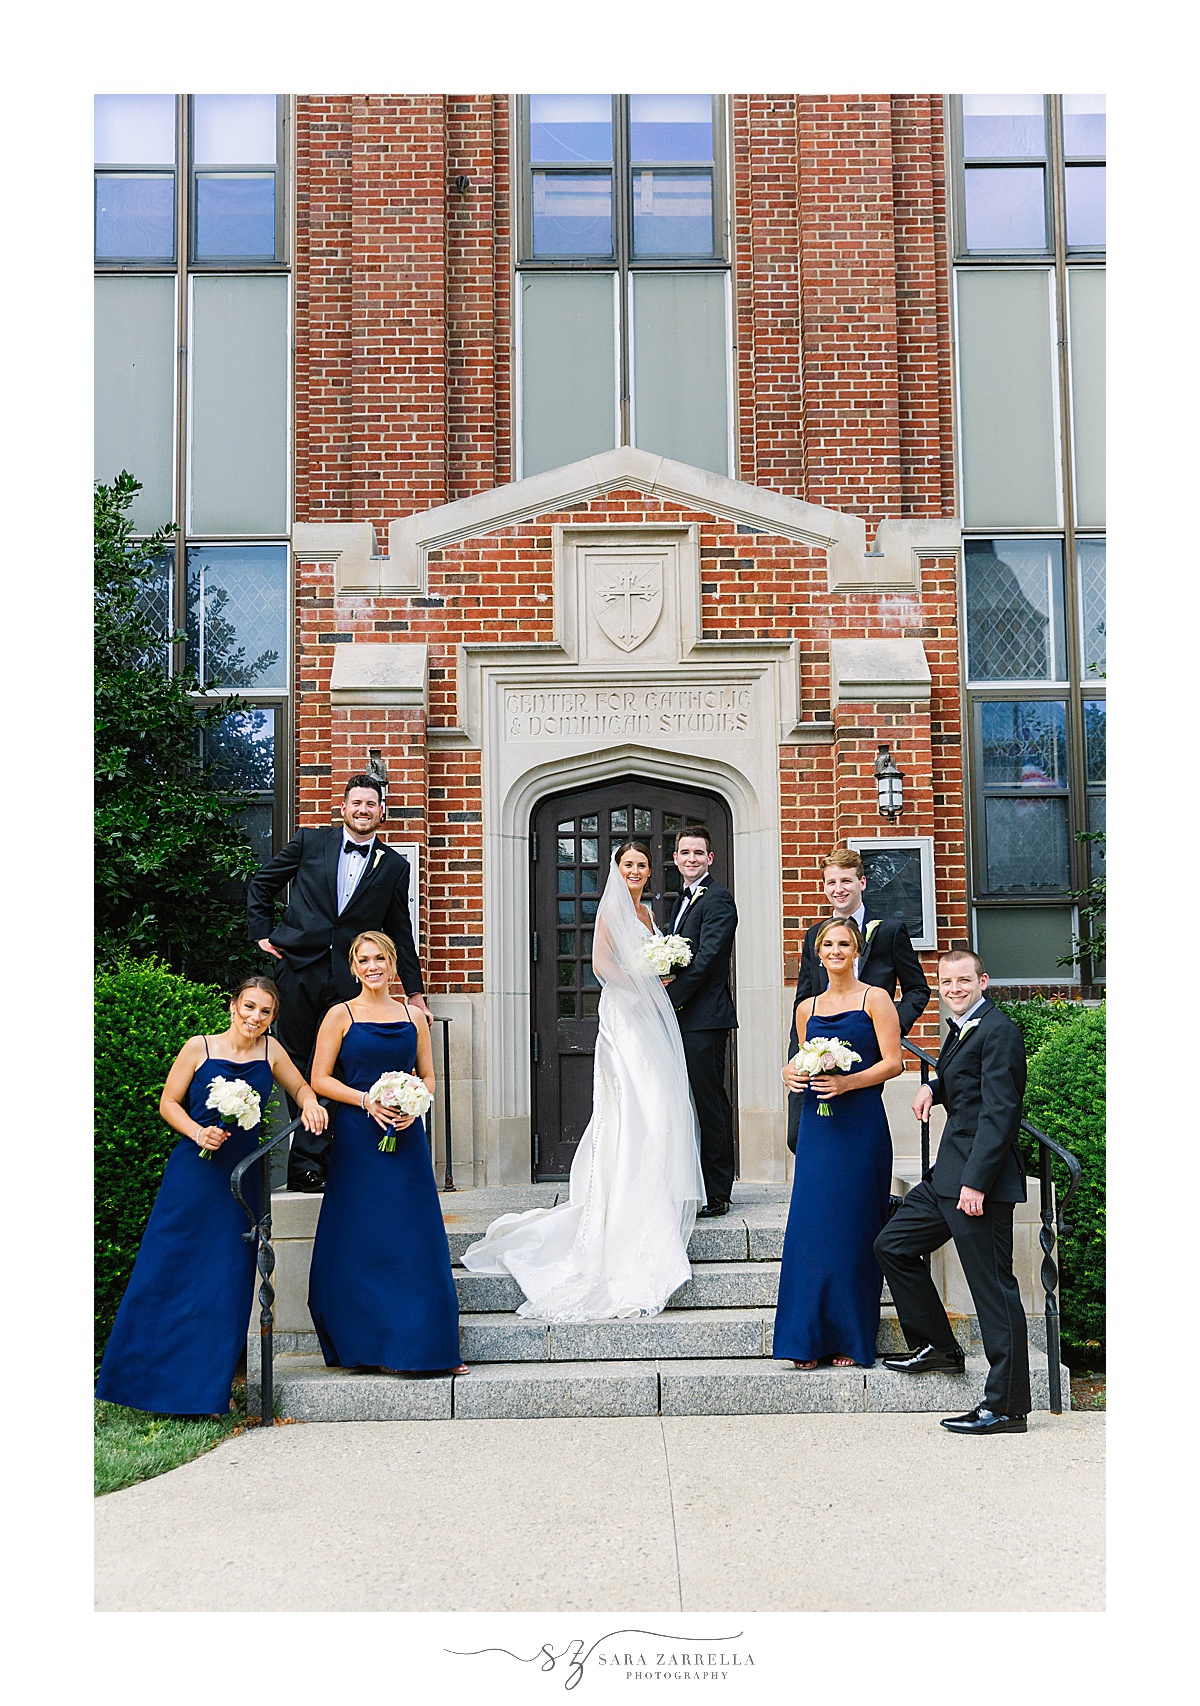 newlyweds pose with bridal party on steps of building at Providence College